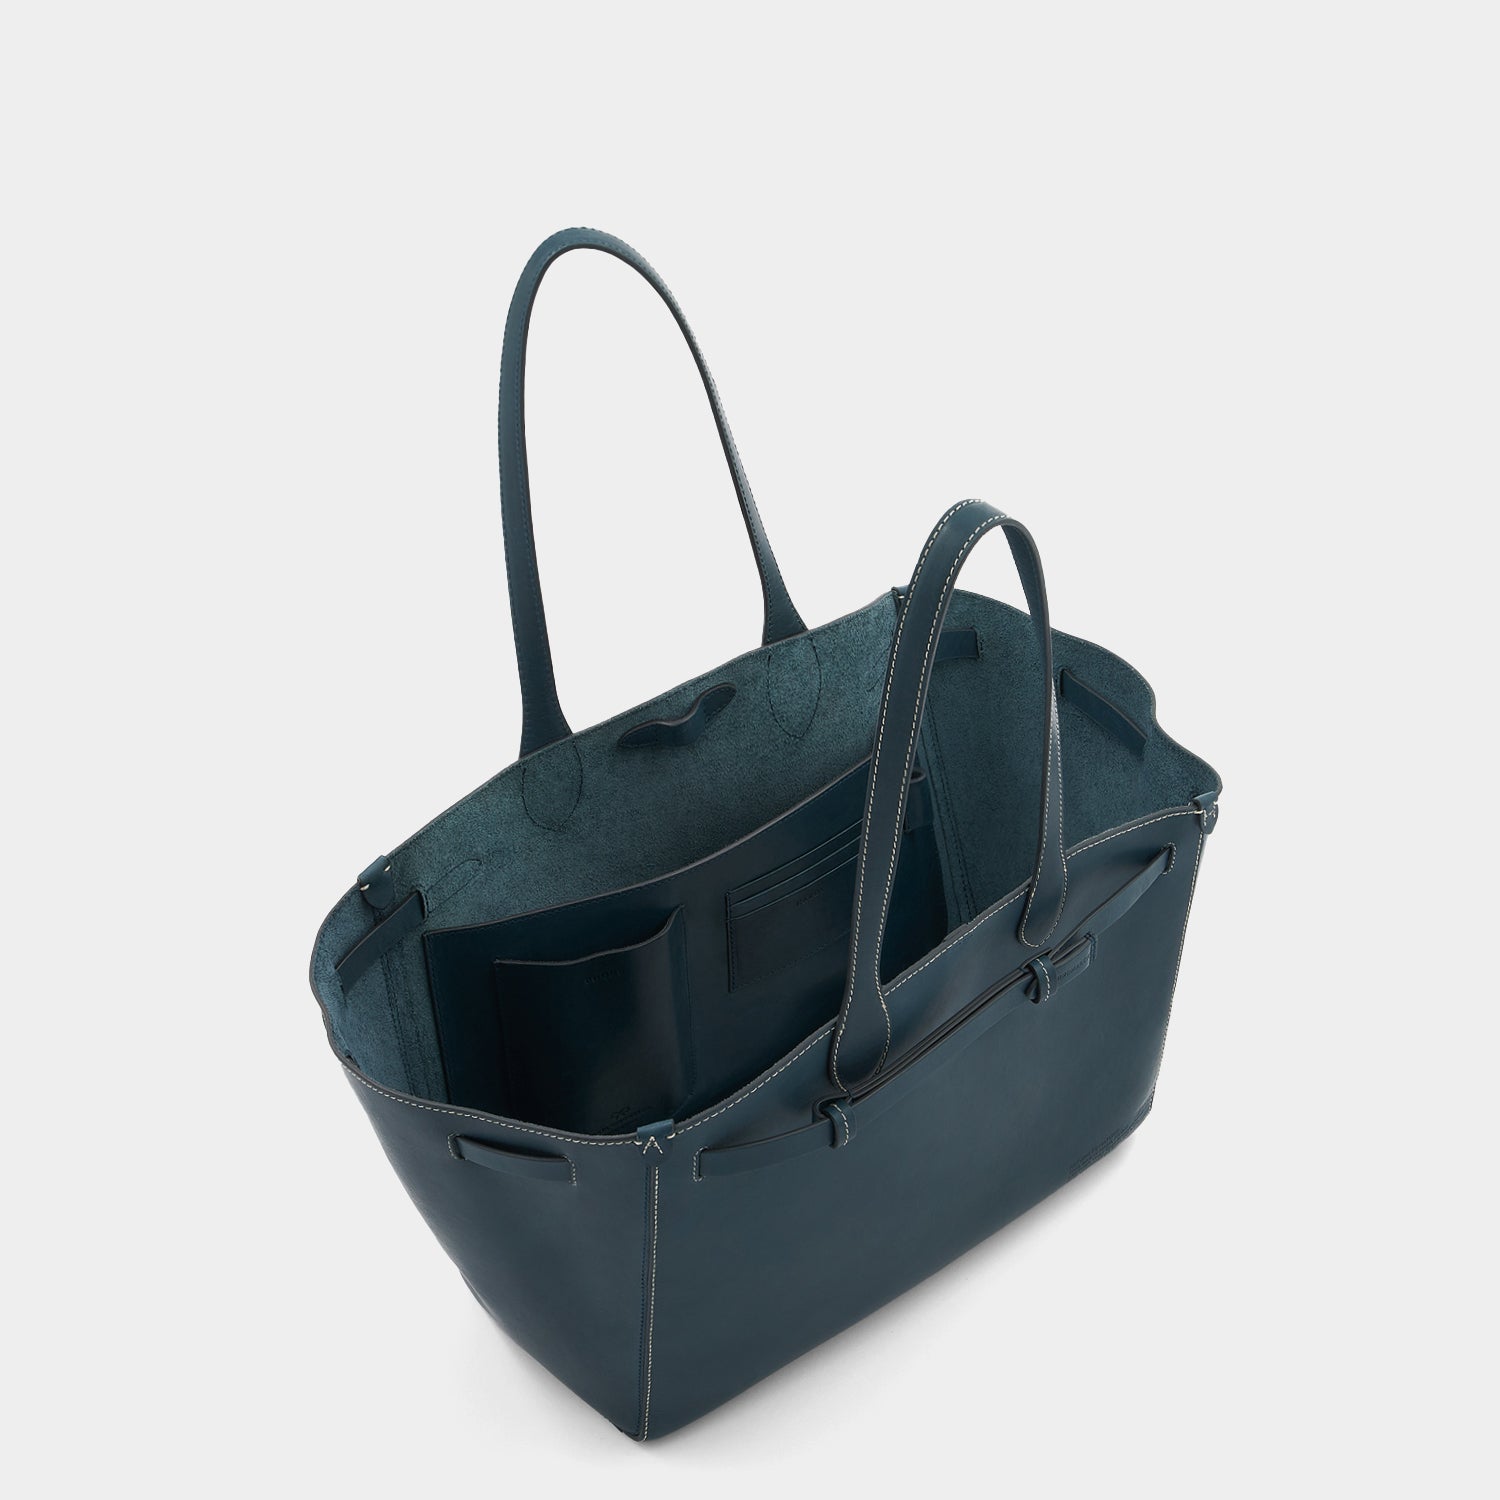 Return to Nature Tote -

                  
                    Compostable Leather in Dark Holly -
                  

                  Anya Hindmarch UK
